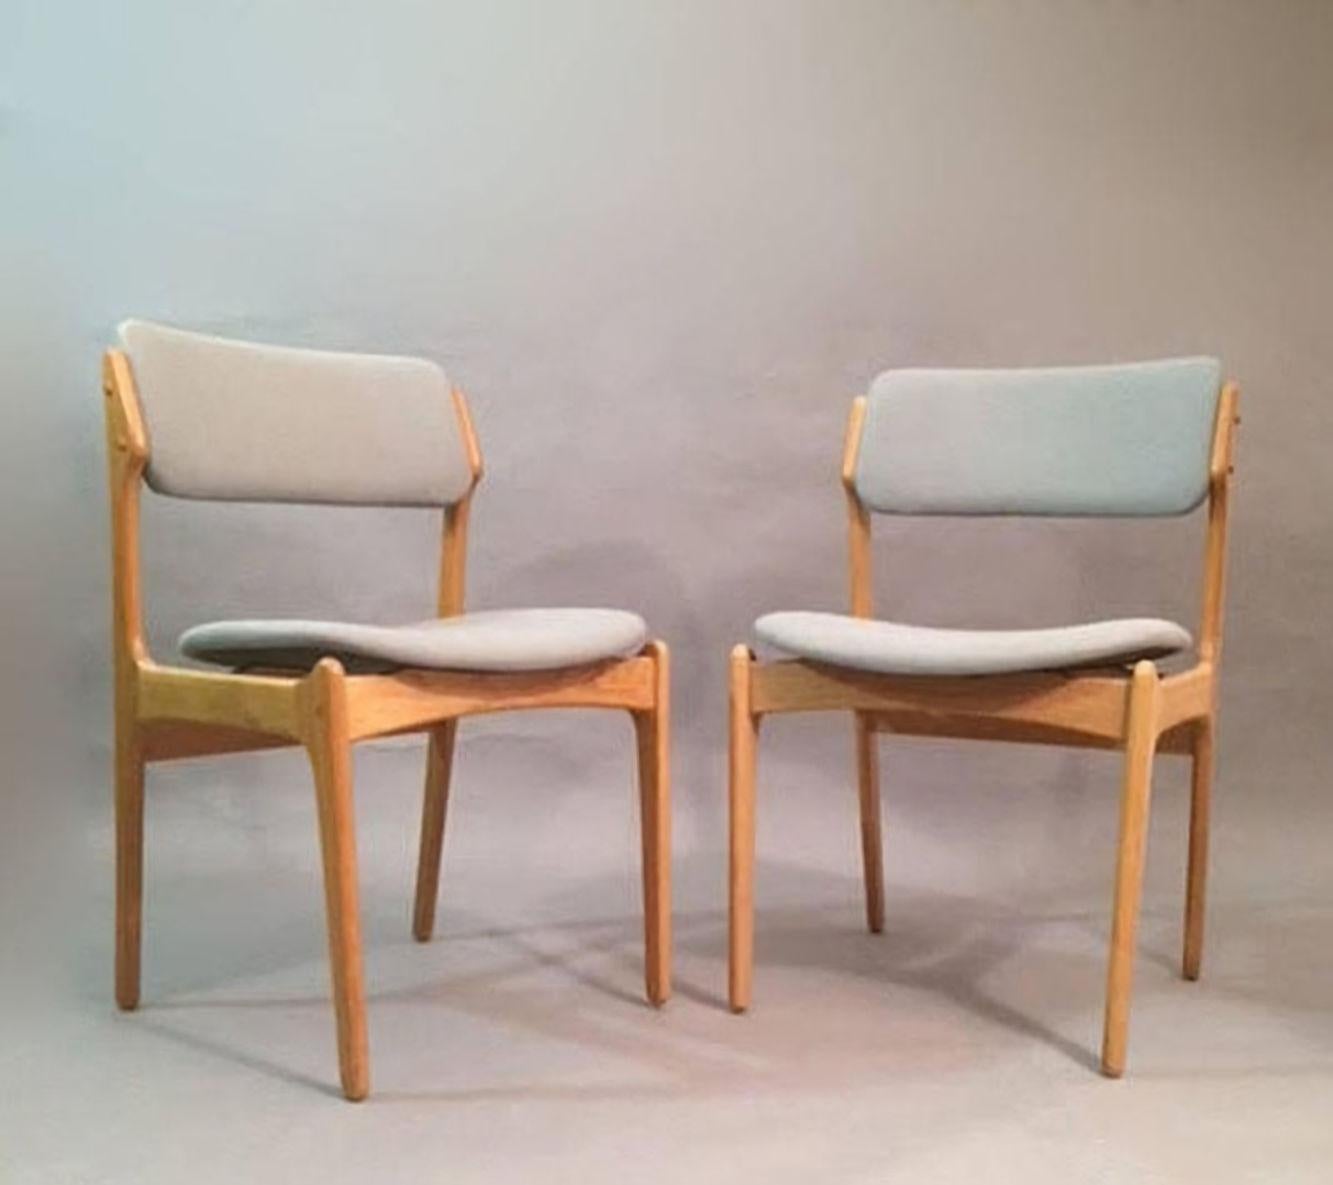 Set of ten fully restored Danish dining chairs inc. reupholstery designed by Erik Buch in 1949 and manufactored by Oddense Maskinsnedkeri.

The chairs have a simple solid construction with elegant lines and a comfortable seating experience on the